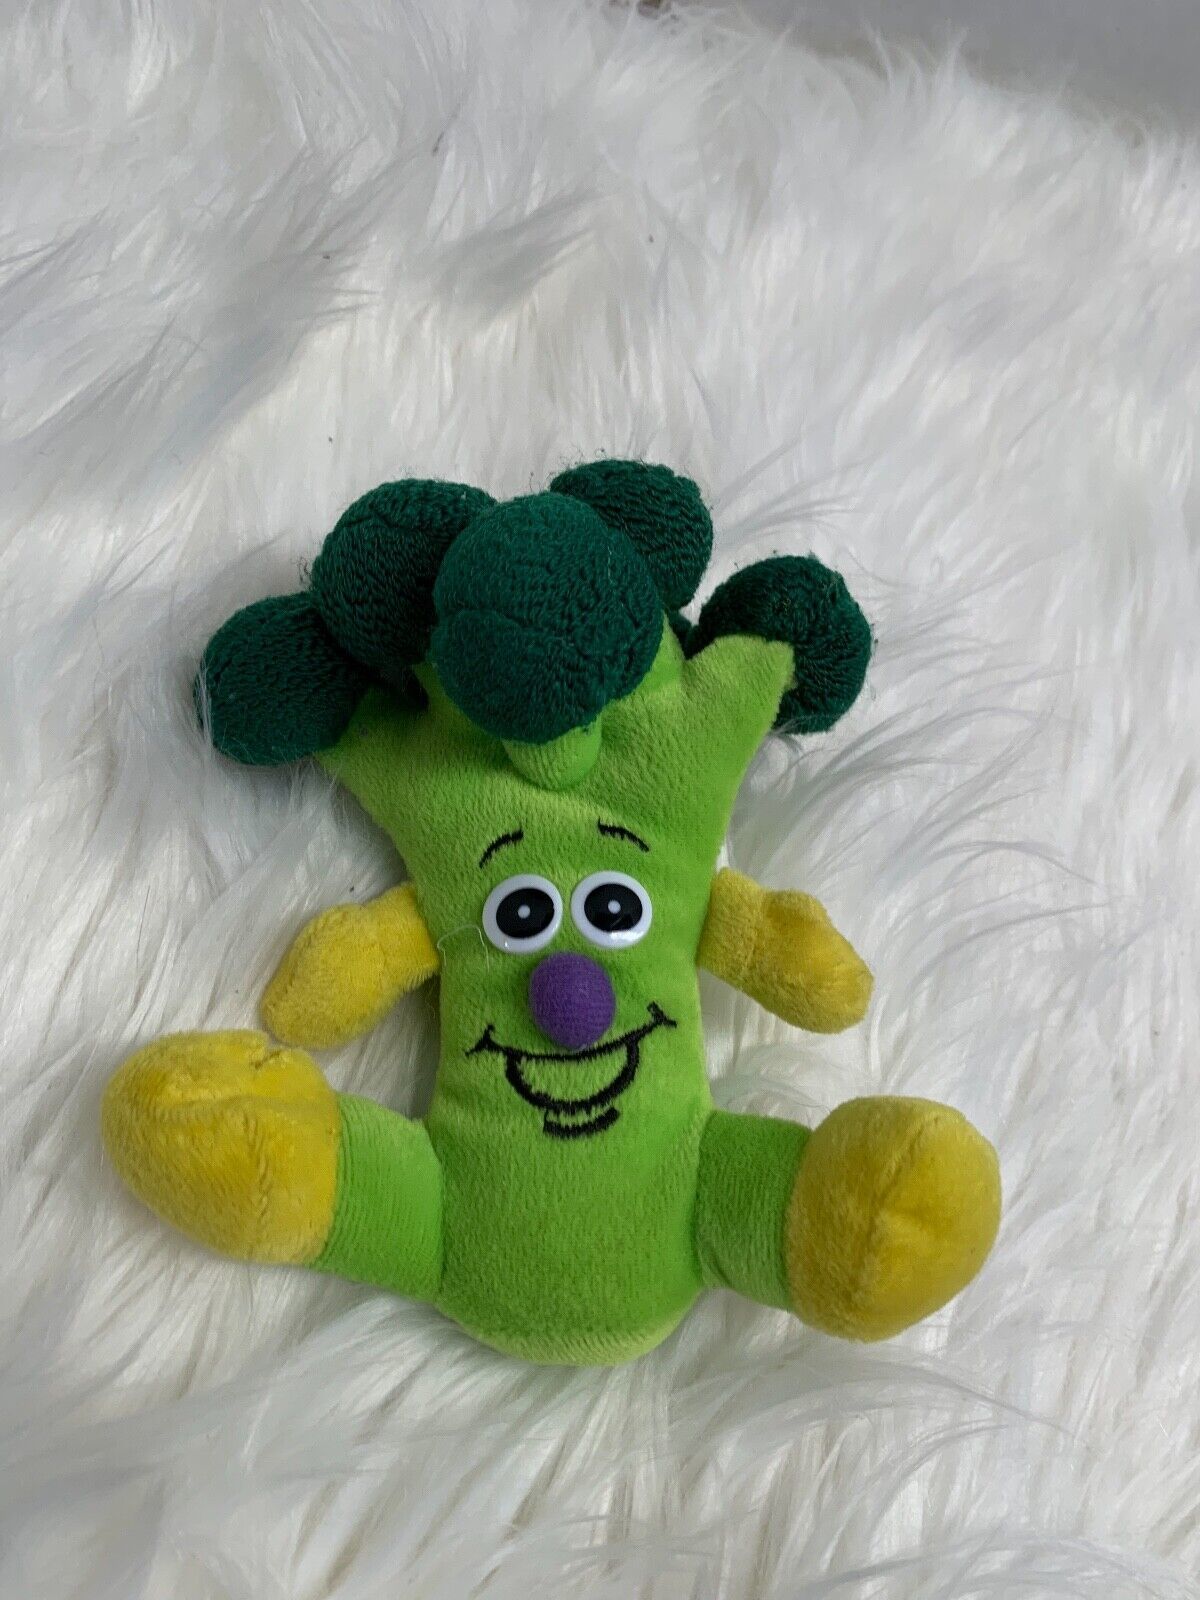 Primary image for Vegetable Veggie Friend Broccoli 5 in T Bean Bag Plush Stuffed Animal Toy Doll